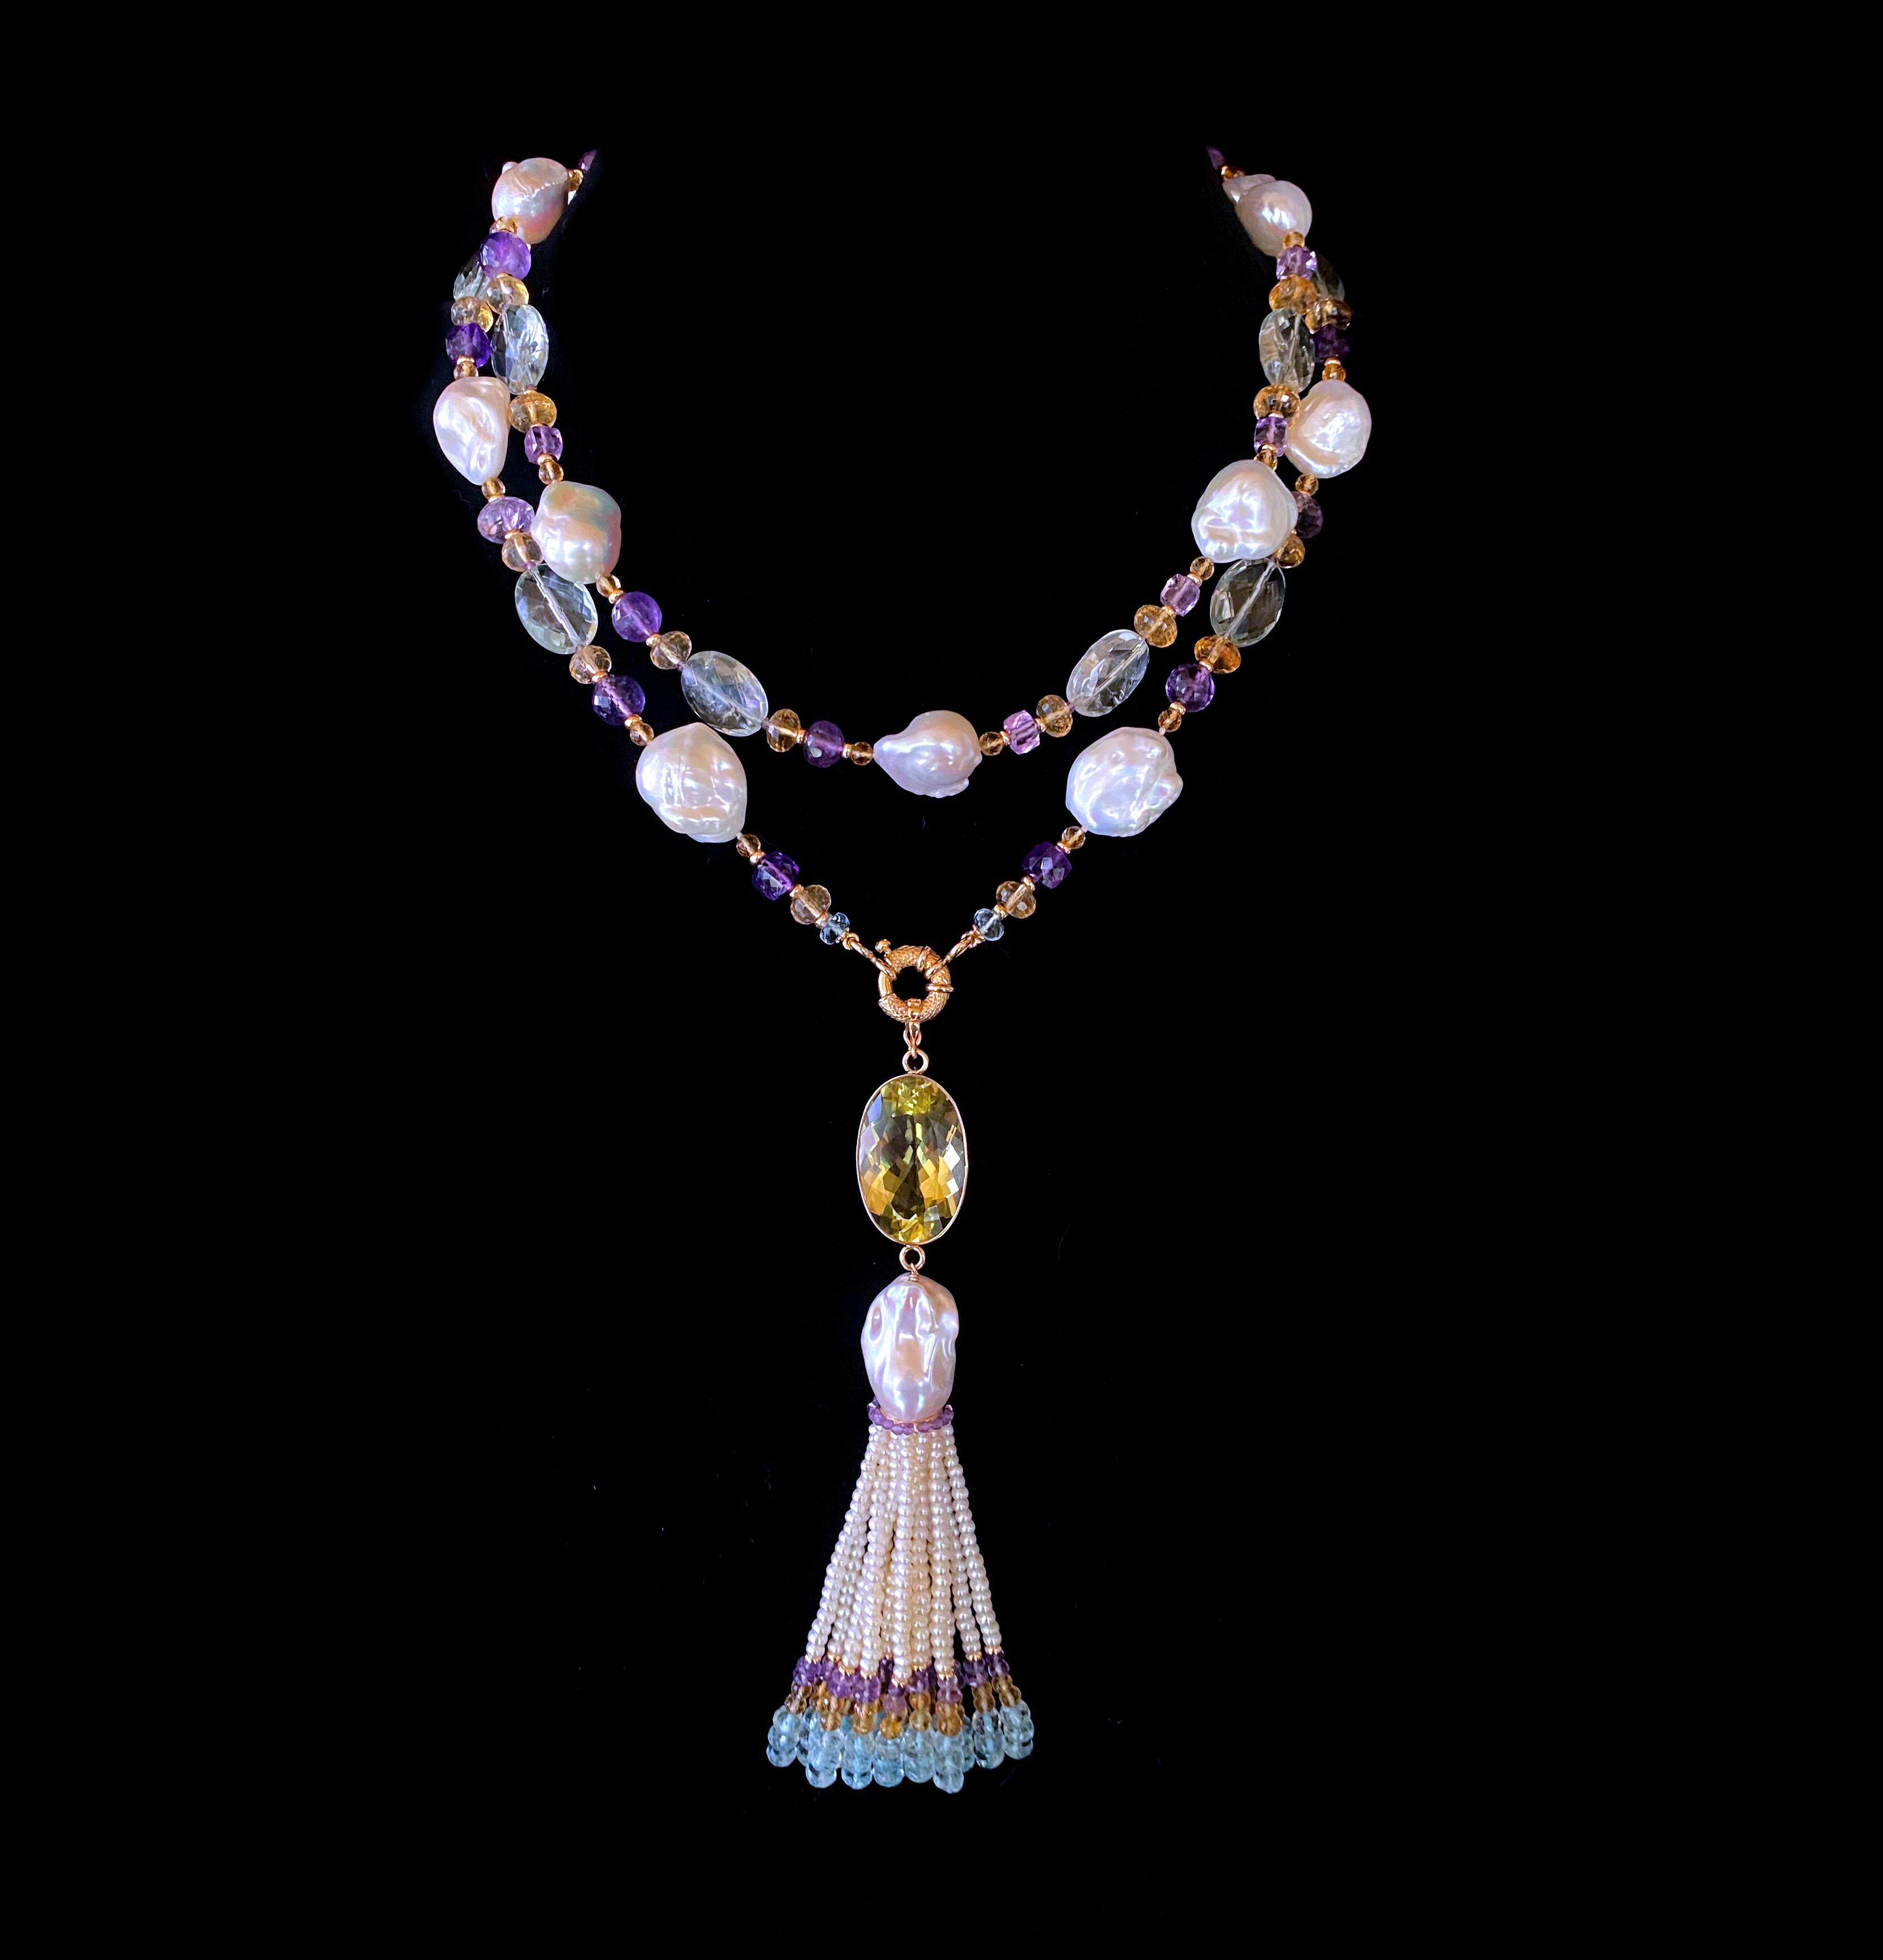 This amazing piece features multi shaped and colored Semi Precious gems and Pearls all strung together into a a gorgeous One Of A Kind Semi Precious Sautoir. Two tones of Purple Amethyst, Green Amethyst, Citrine, Aquamarine and solid 14k Yellow Gold